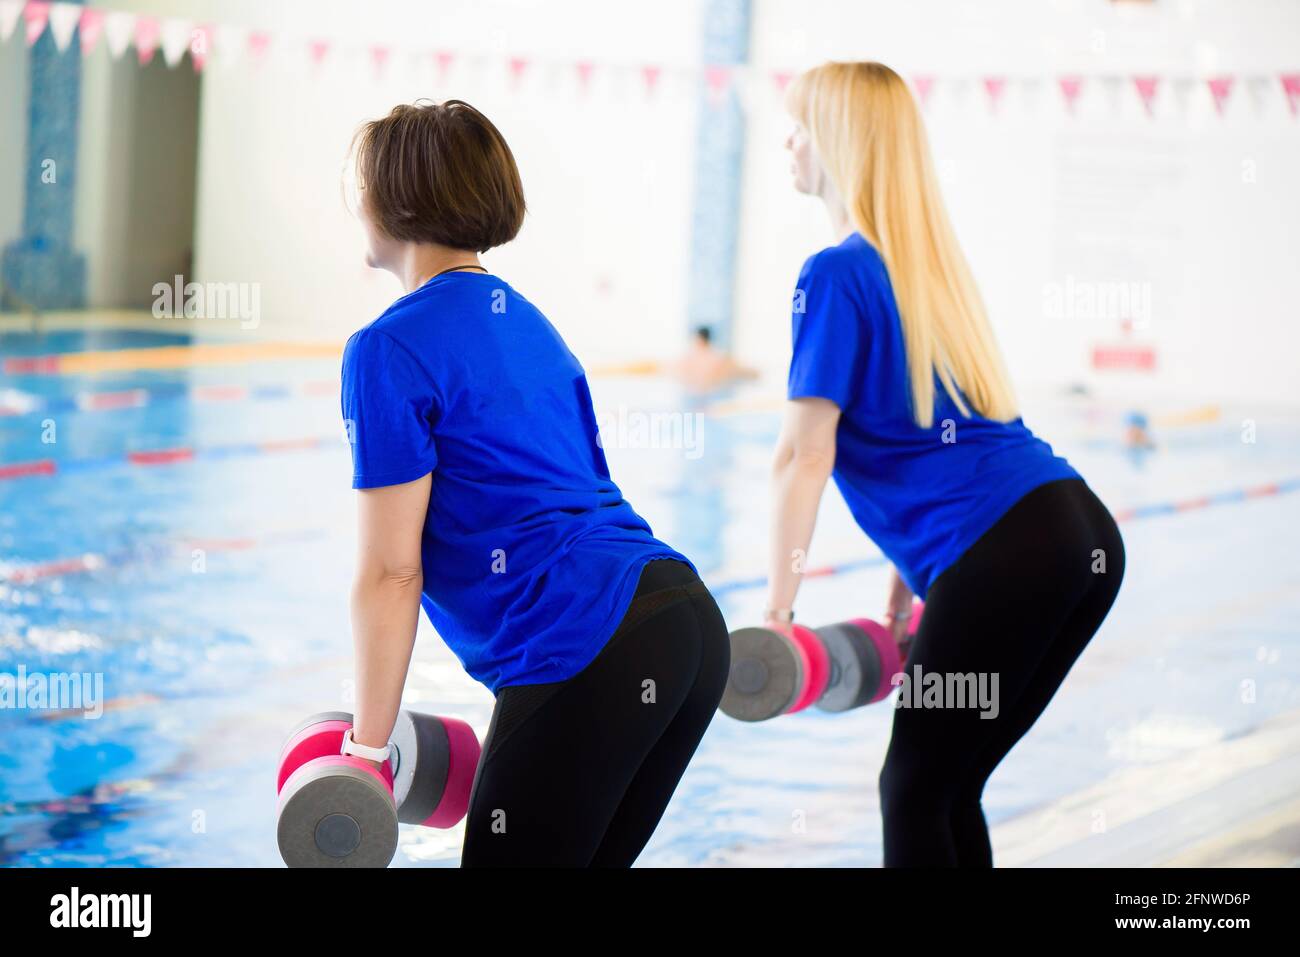 Two erobics trainers show the workout exercises in front of the pool. Stock Photo